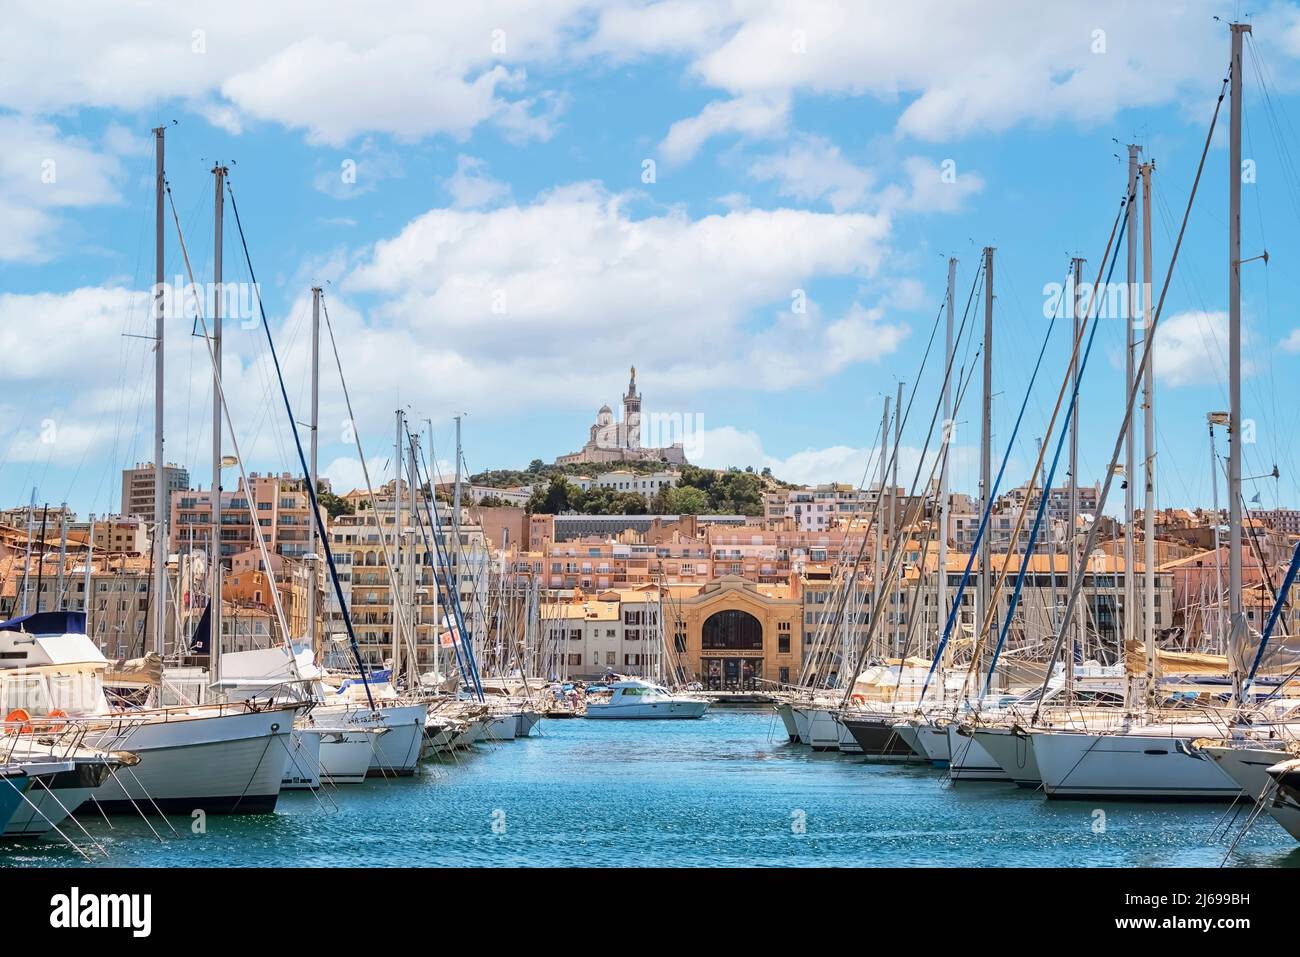 The Old harbor in Marseille city Stock Photo